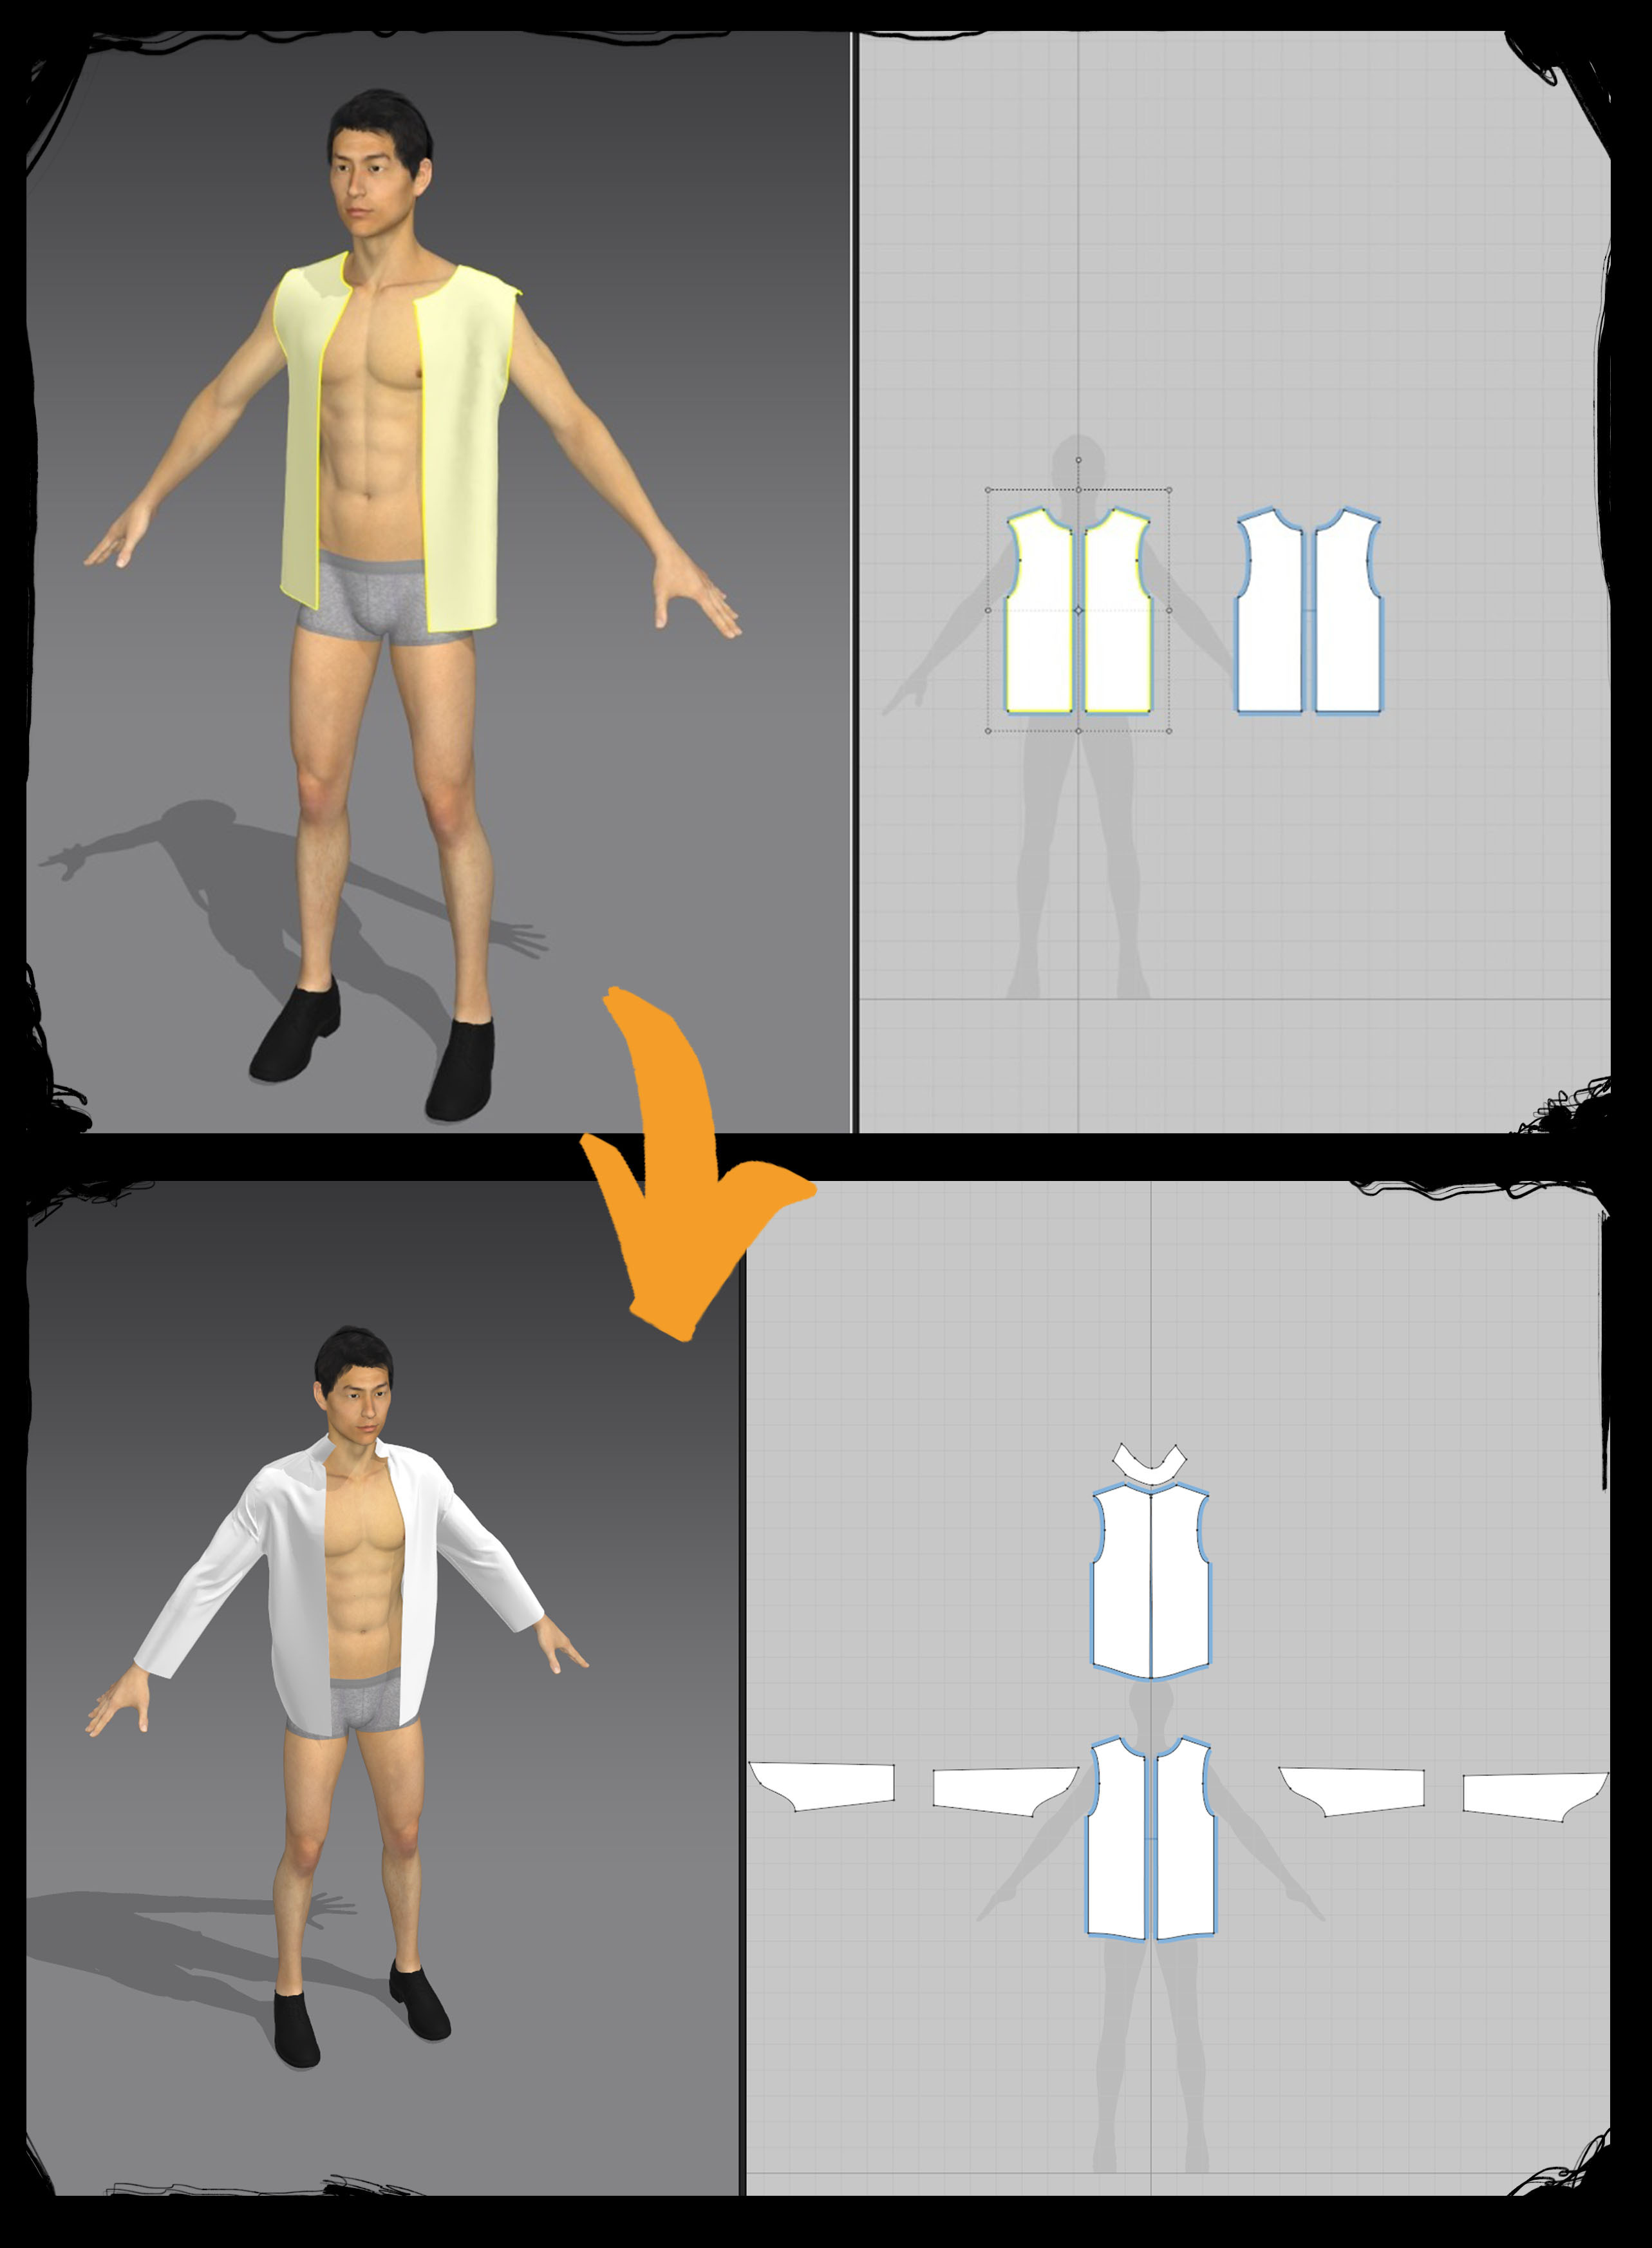 Shirt creation from scratch before simulation